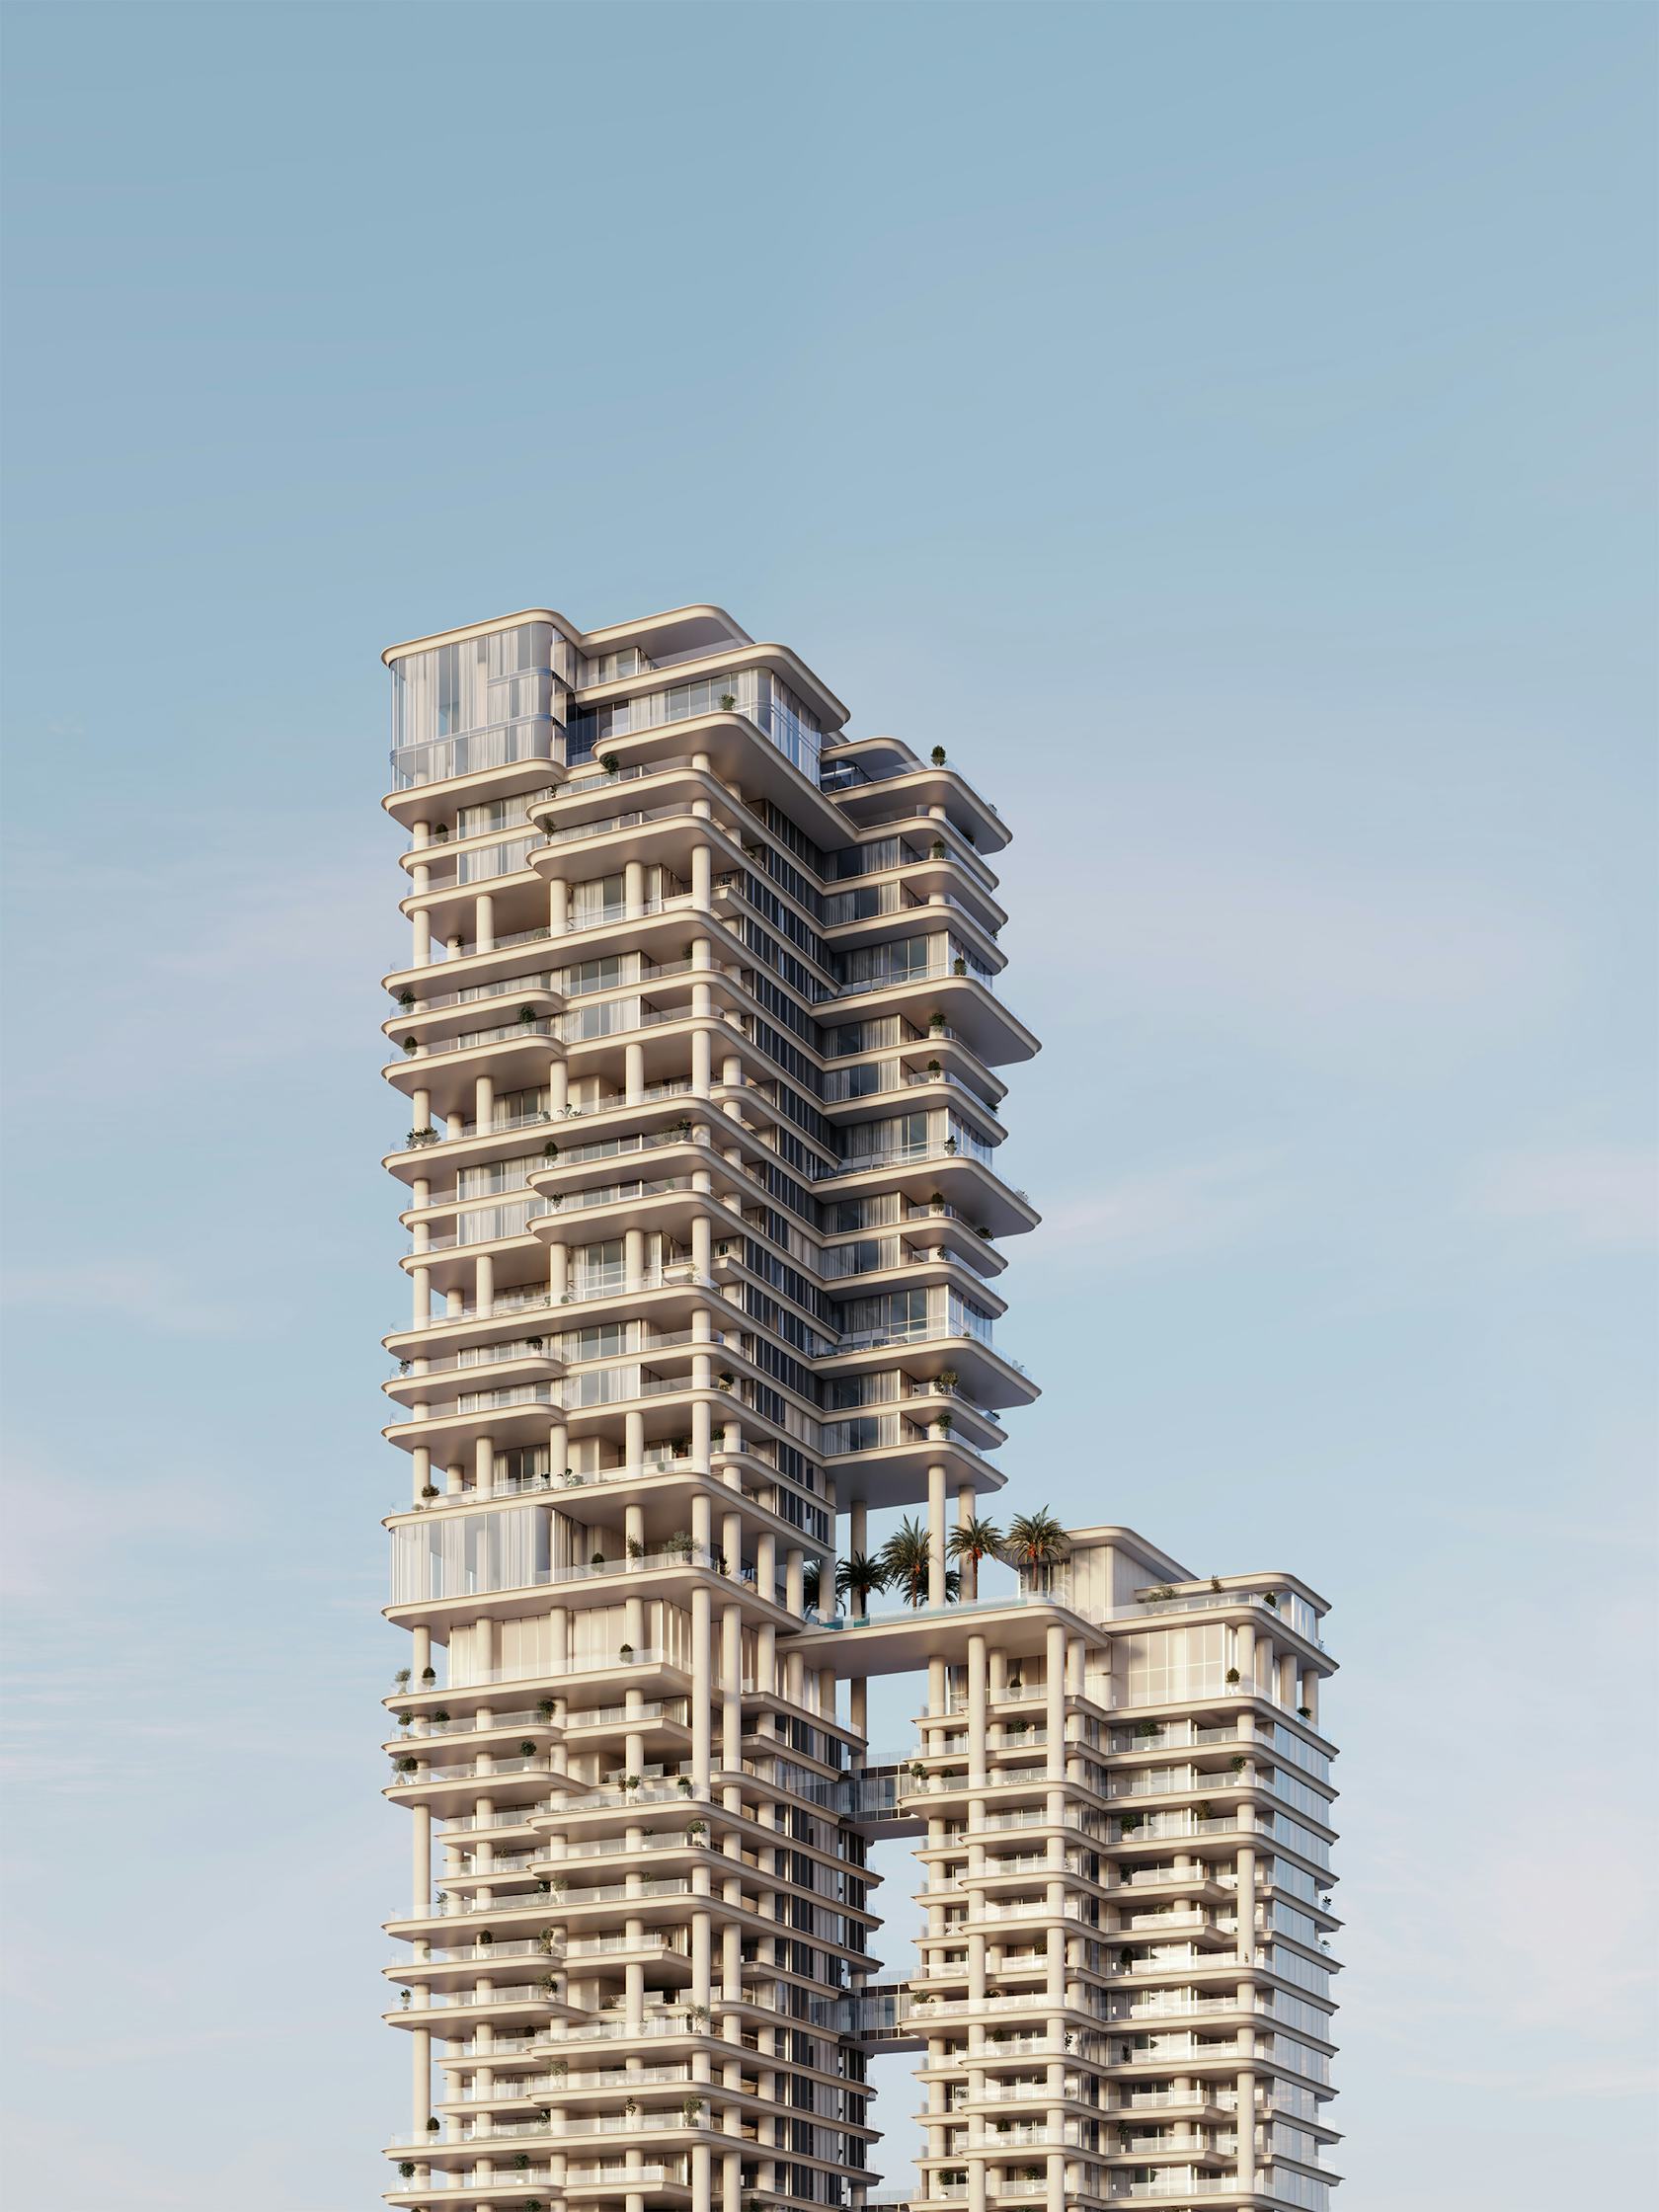 city urban architecture building high rise condo housing apartment building tower